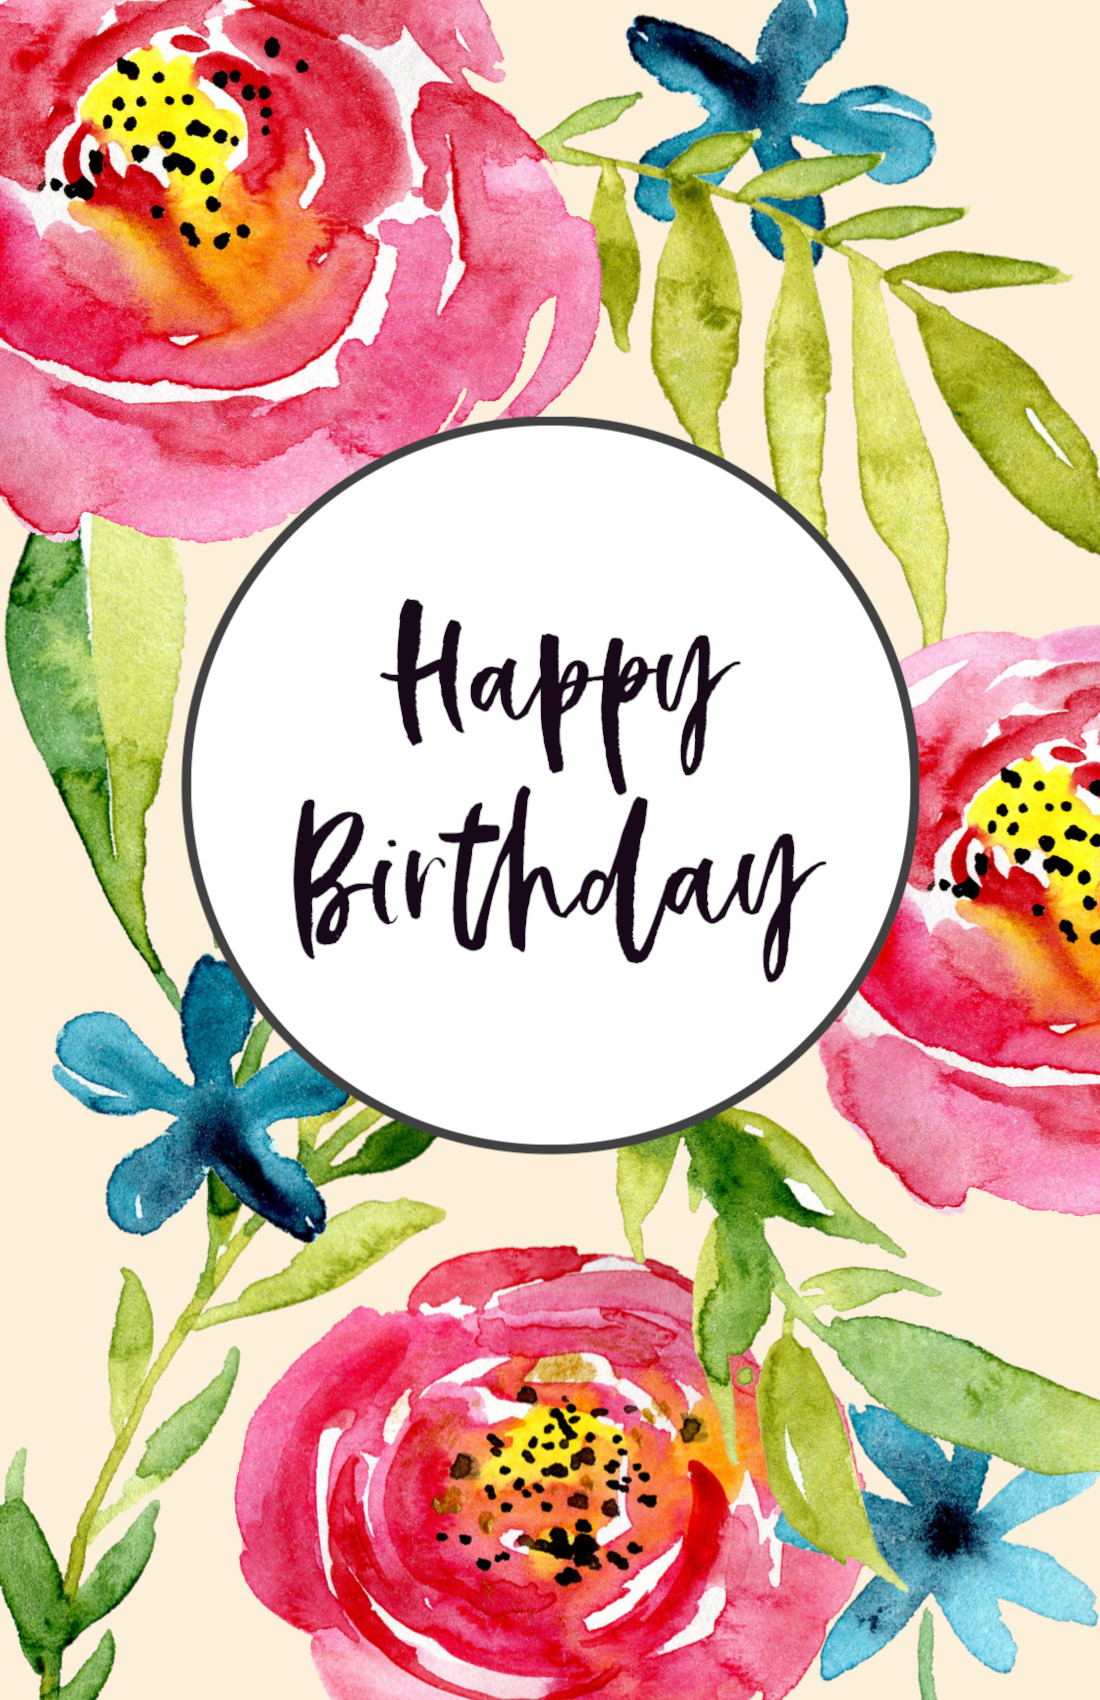 Birthday Greetings Cards
 Free Printable Birthday Cards Paper Trail Design